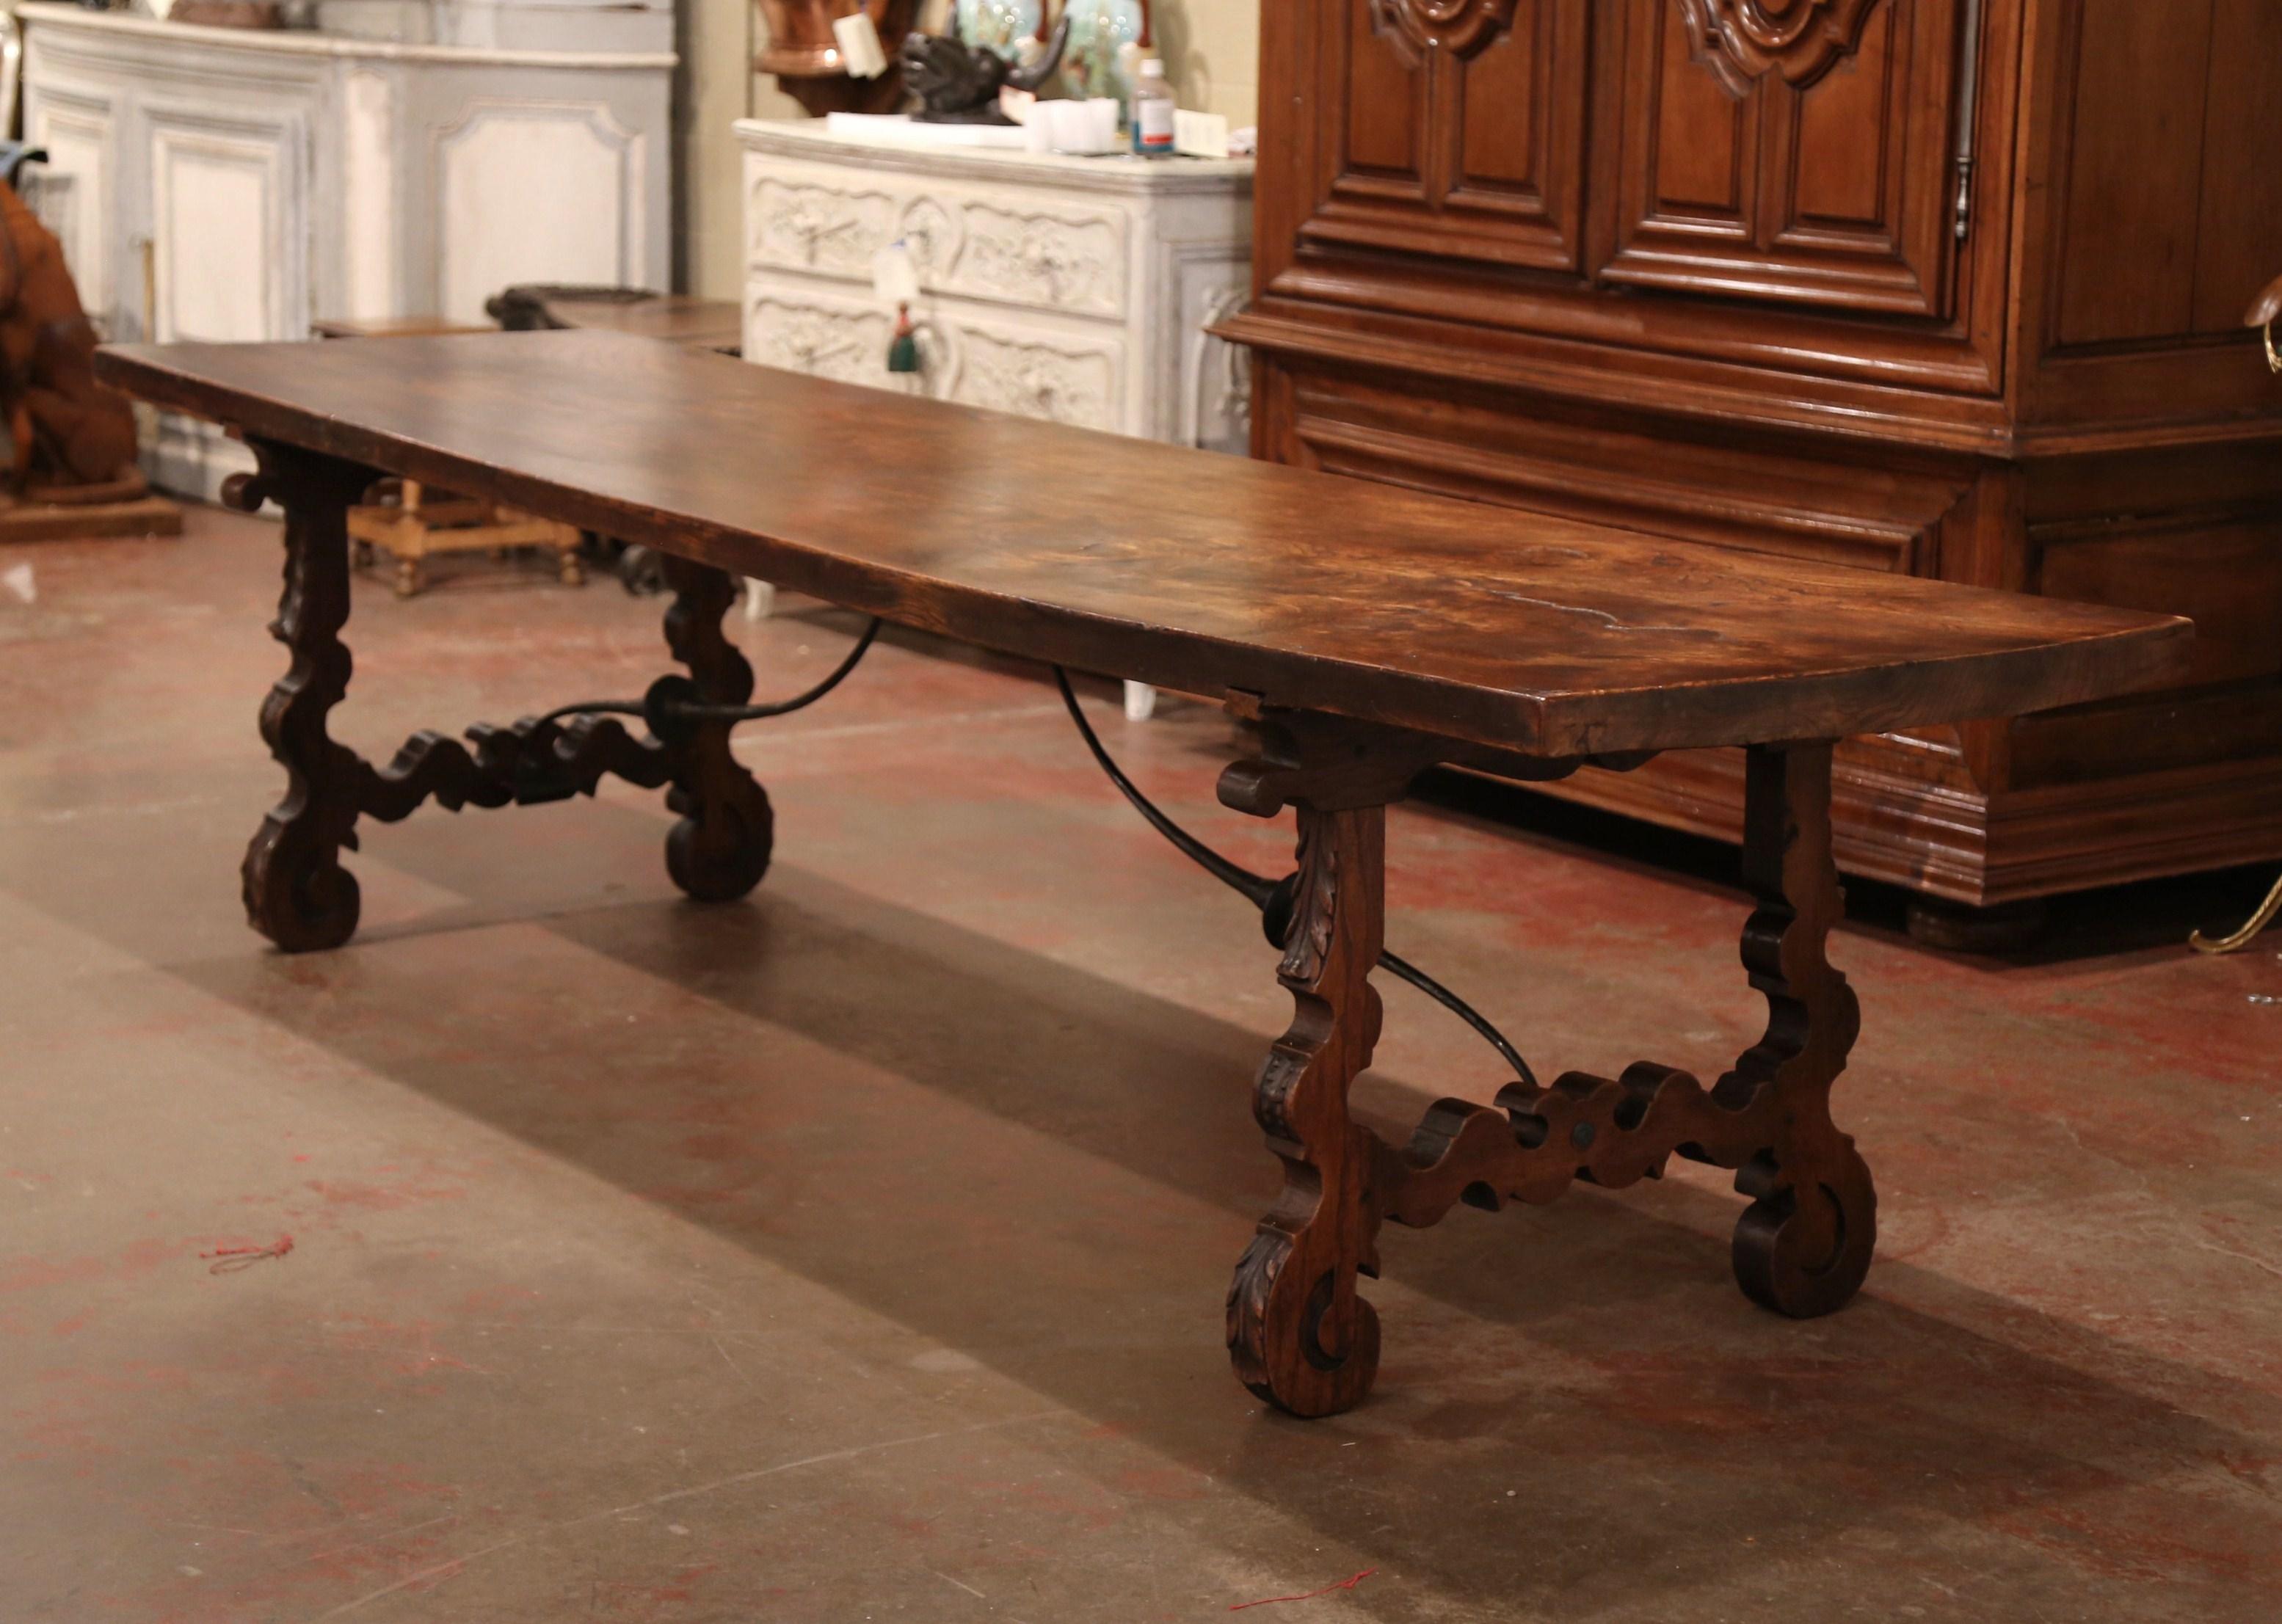 This long antique fruitwood table was crafted in Spain, circa 1850, the elegant table stands on two carved pedestal legs decorated with acanthus leaves and connected with a forged black iron stretcher for stability and structure. The thick top is